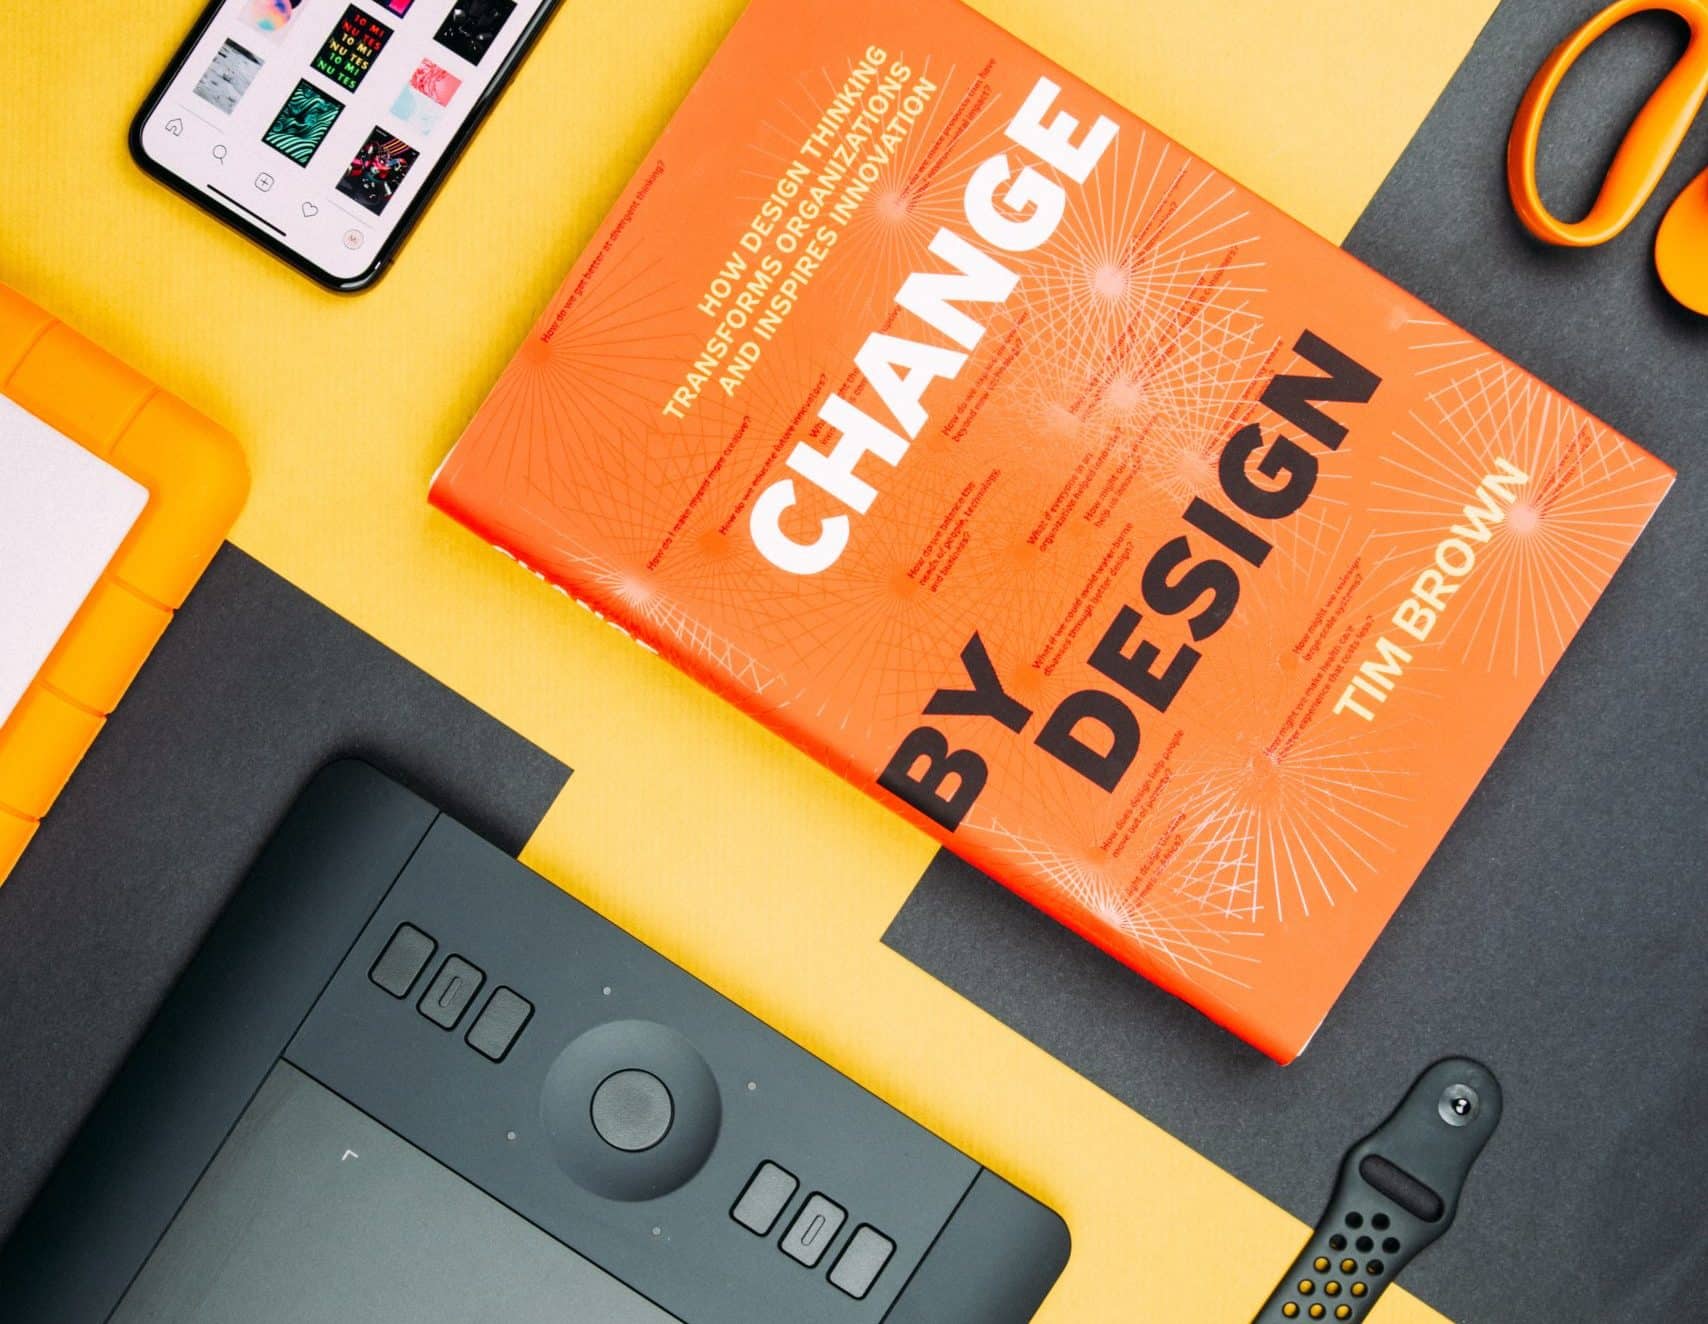 Change by Design by Tim Brown book beside smartphone